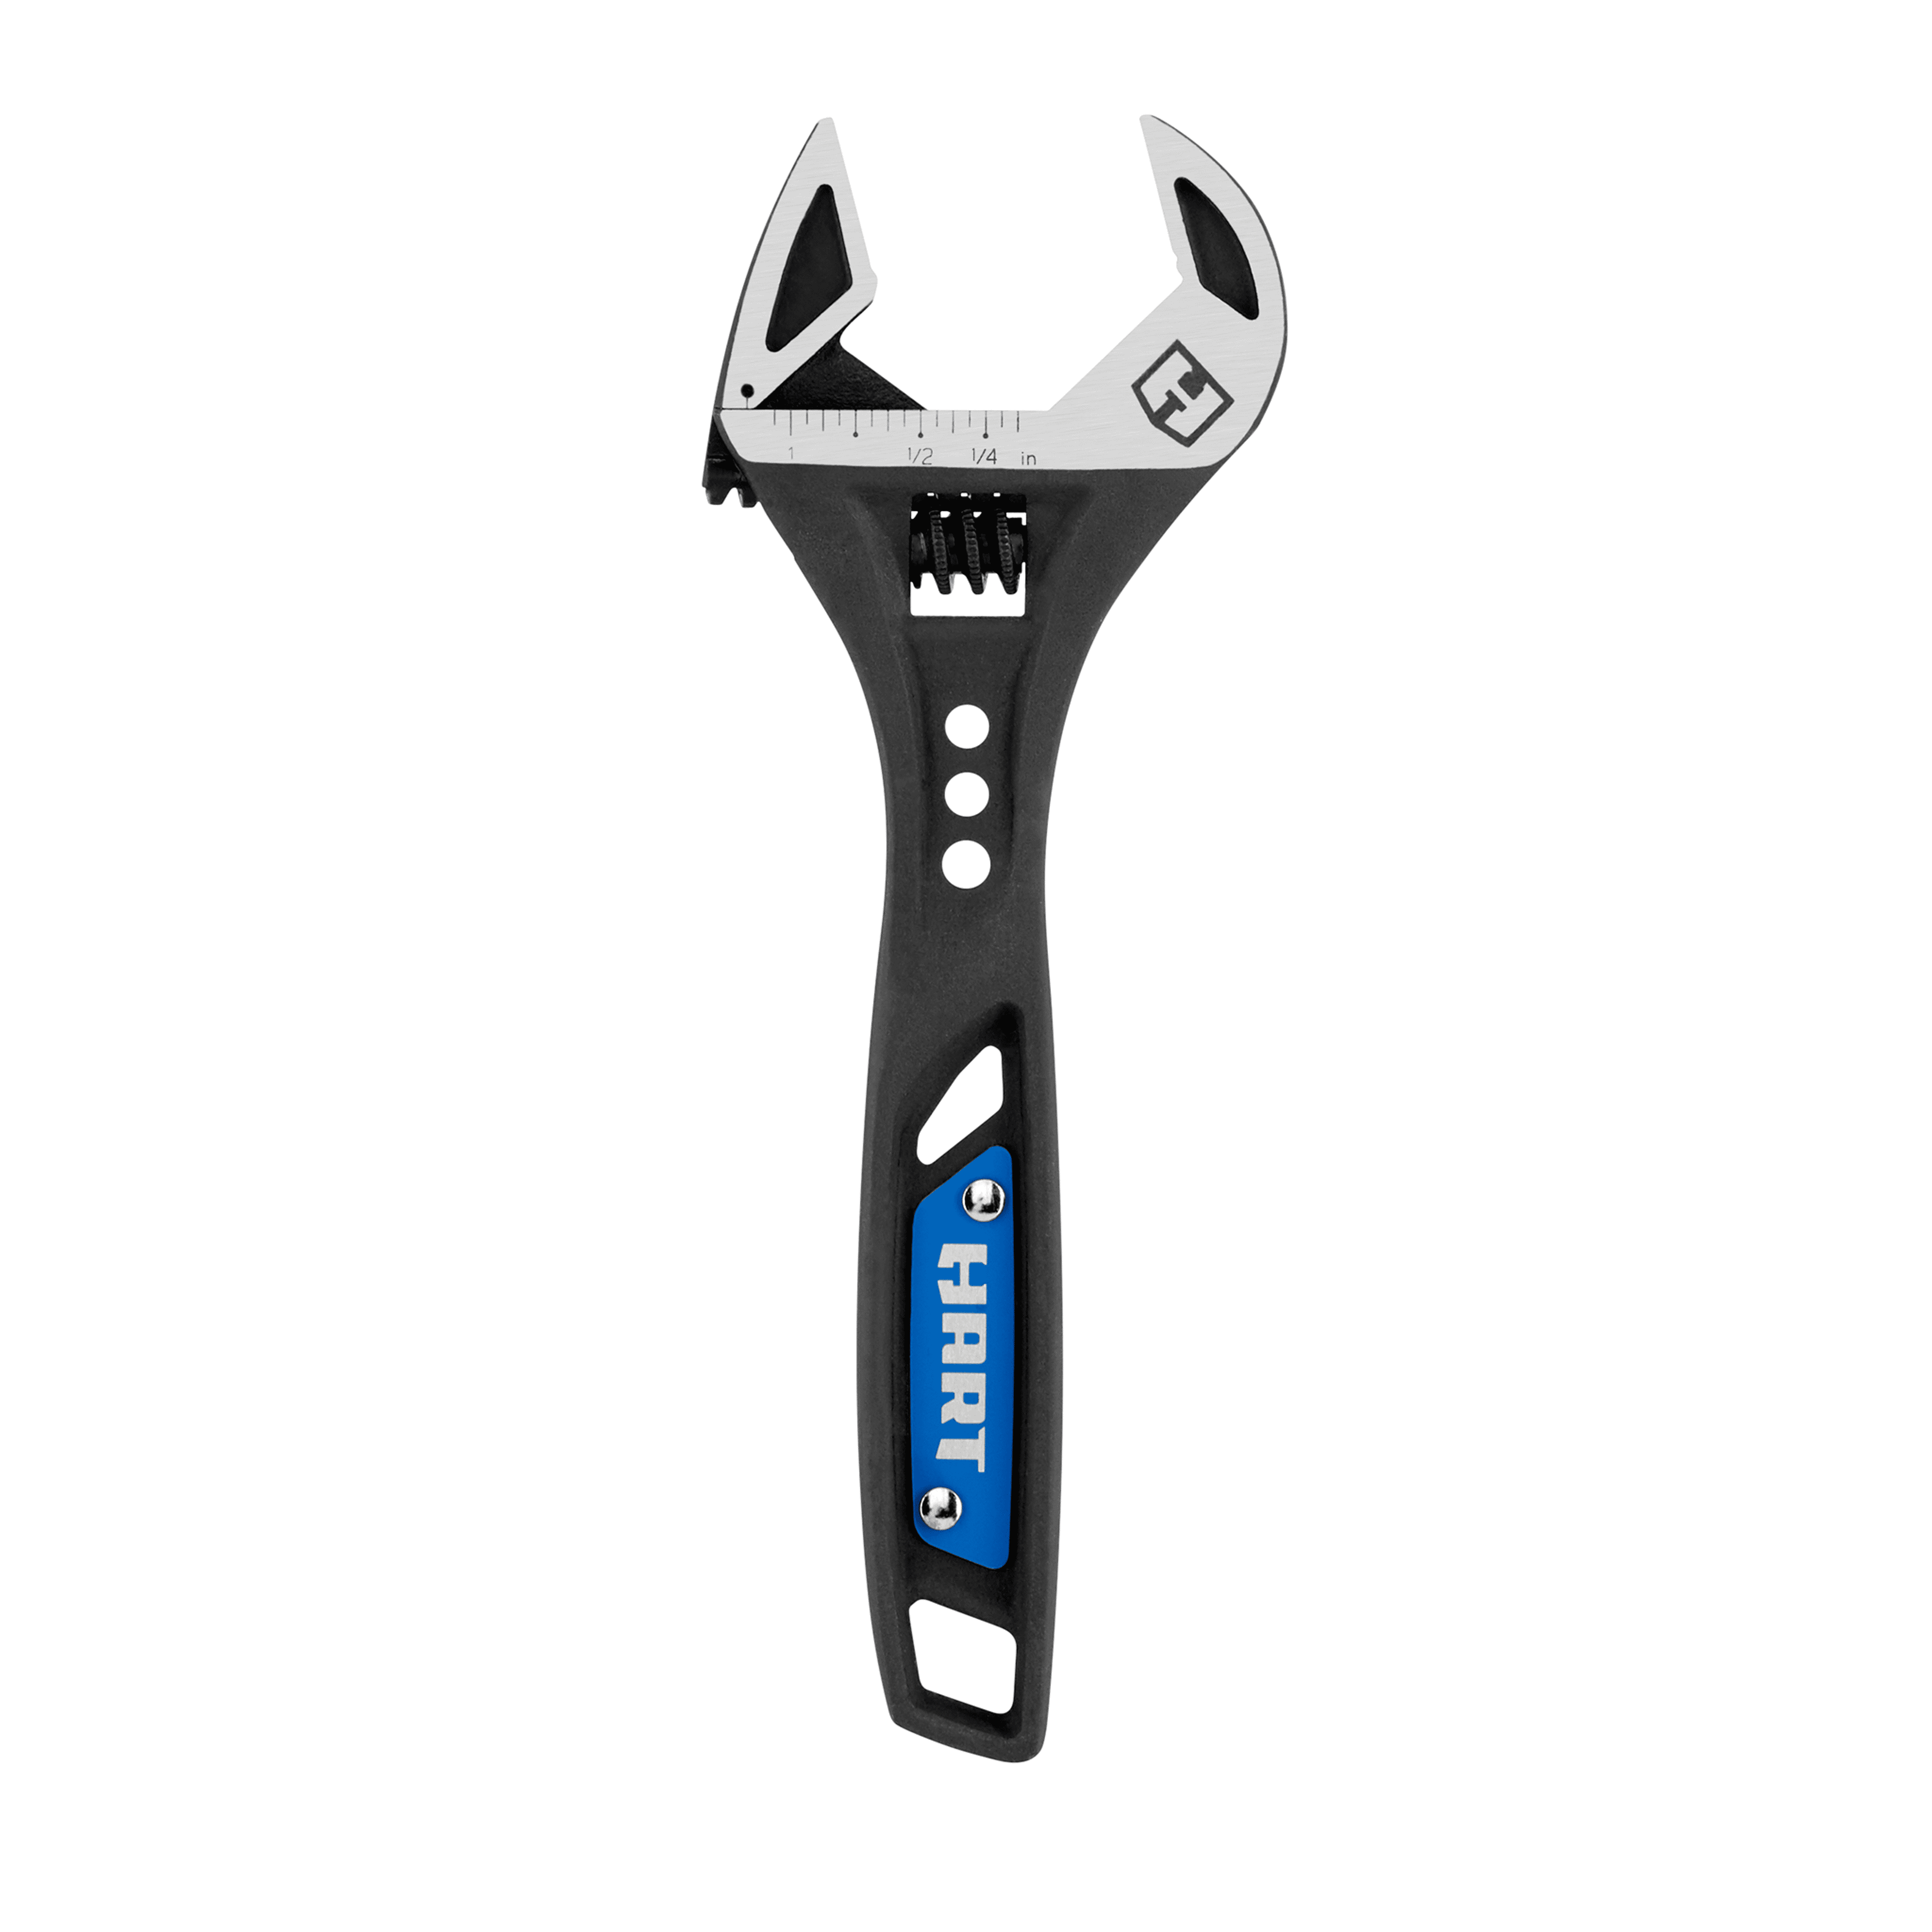 Faucets Portable Pipe Spanner etc for Hoses Pipes Sanitary Ware Orange Comfort Grip 7.9 Inch Adjustable Wrench Dual Purpose Movable Wrench with 1.7 Inch Wide Jaw Opening